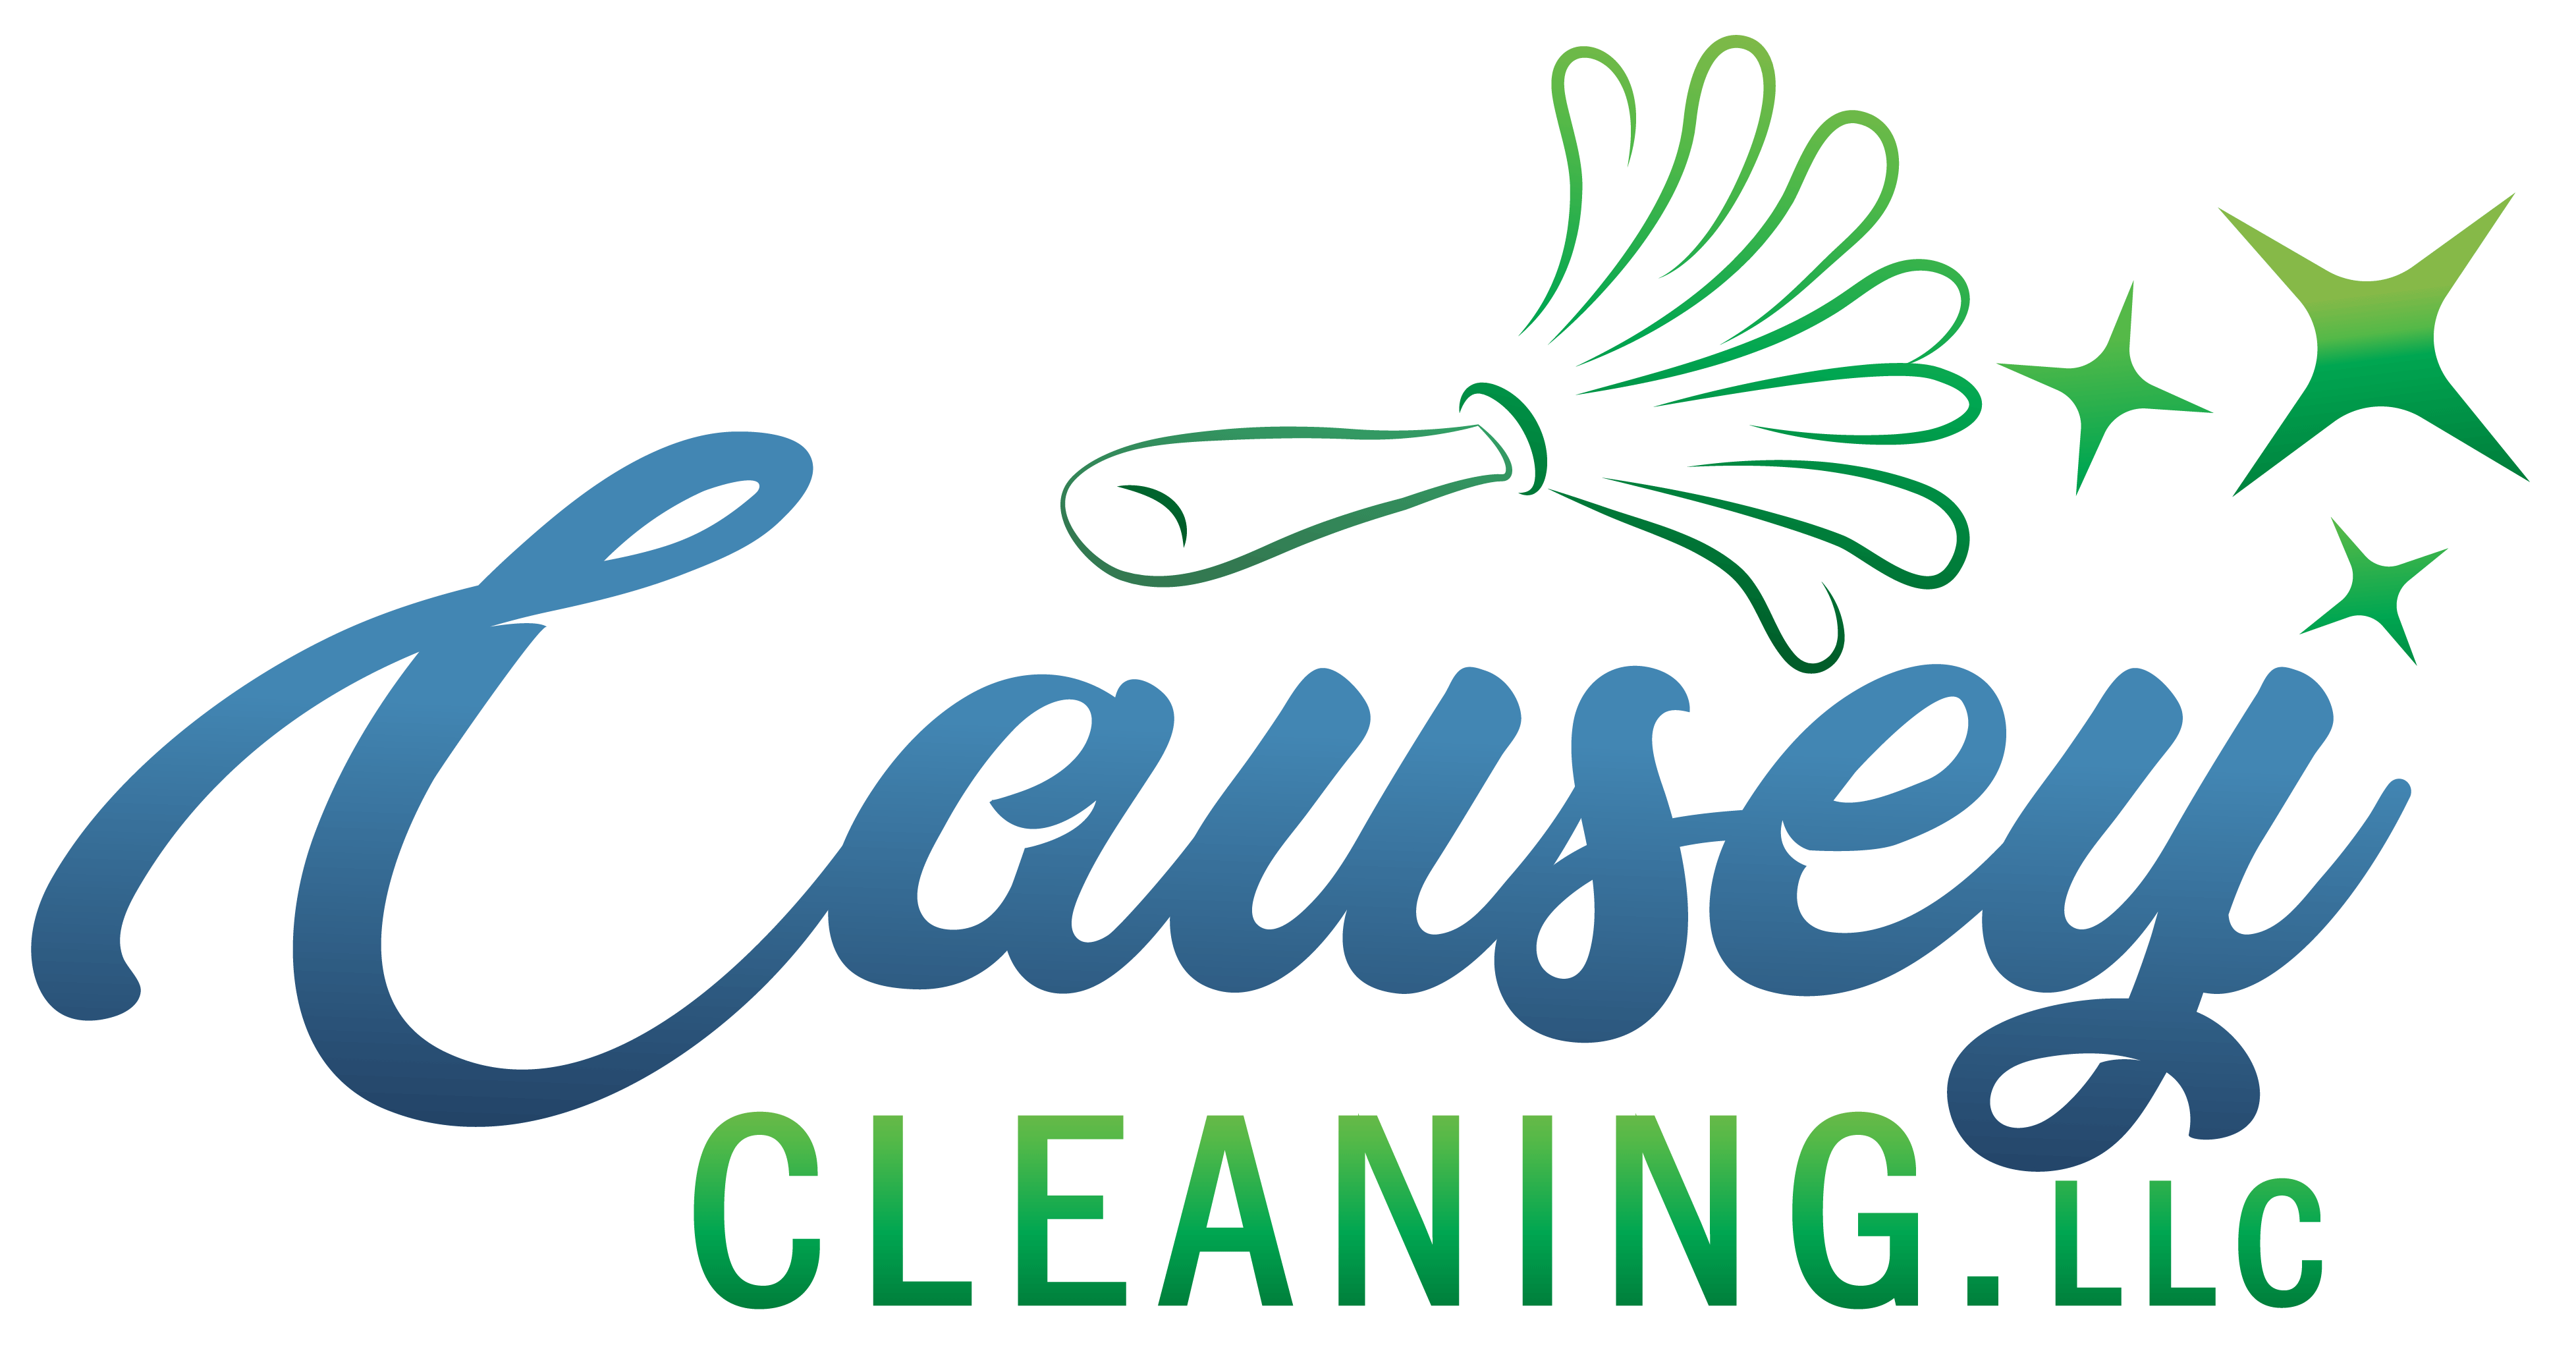 H & A Causey Cleaning LLC